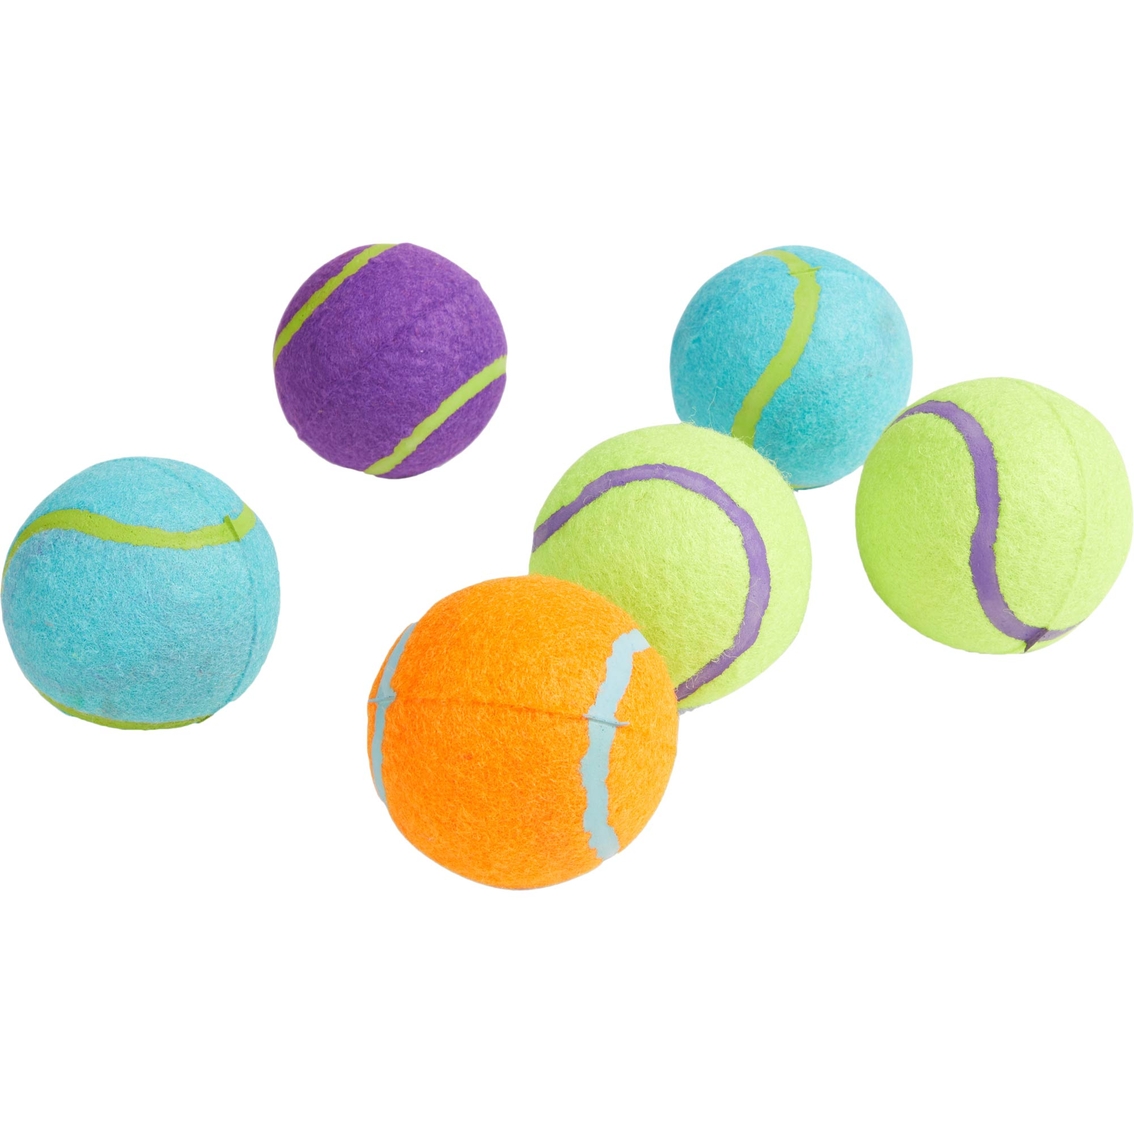 Leaps & Bounds Tennis Balls Dog Toy 6 pk. - Image 2 of 2